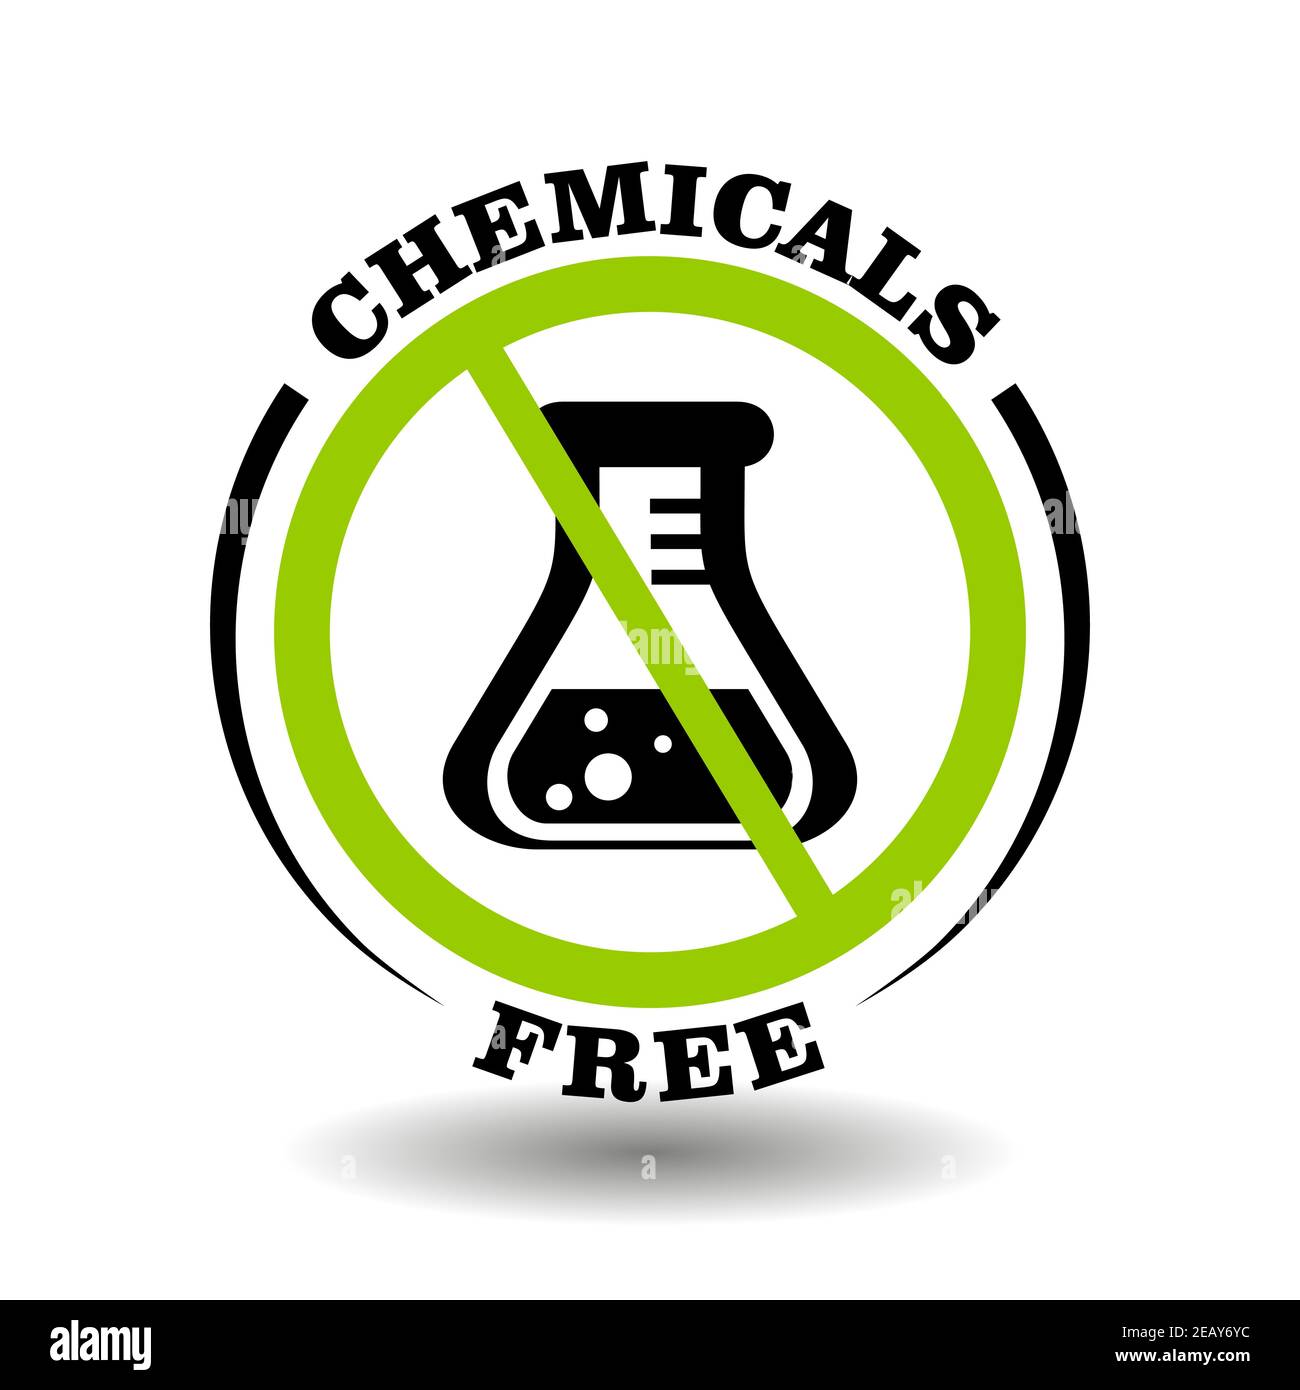 Chemical free label Stock Vector Images - Alamy